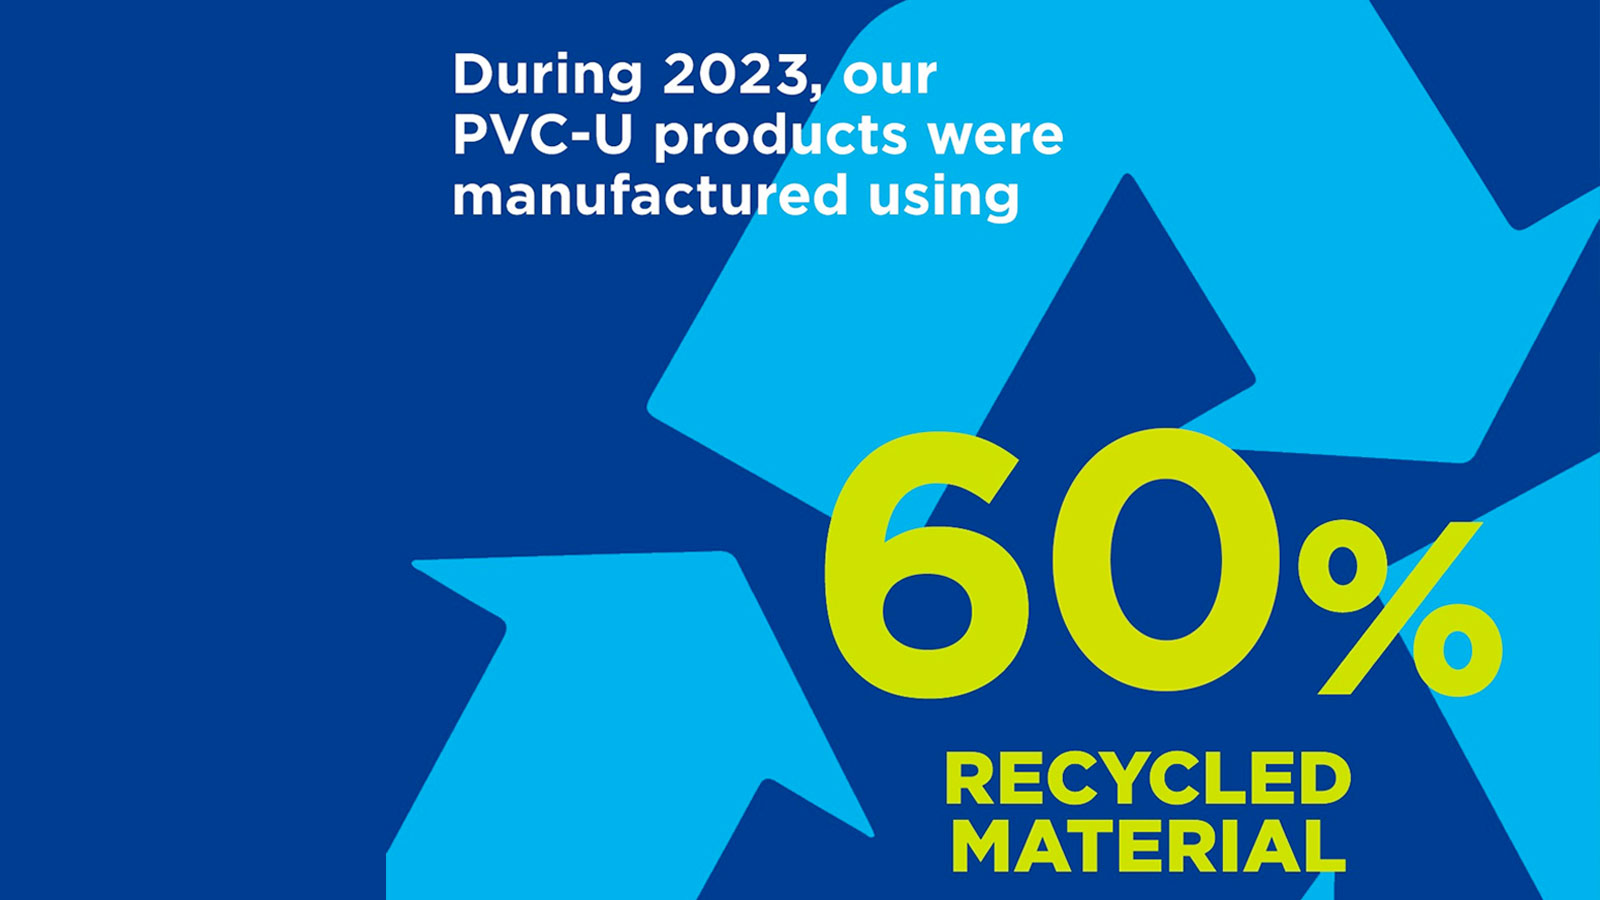 Marshall-Tufflex managed to use an average of 60% recycled material across its PVC-U cable management range throughout 2023